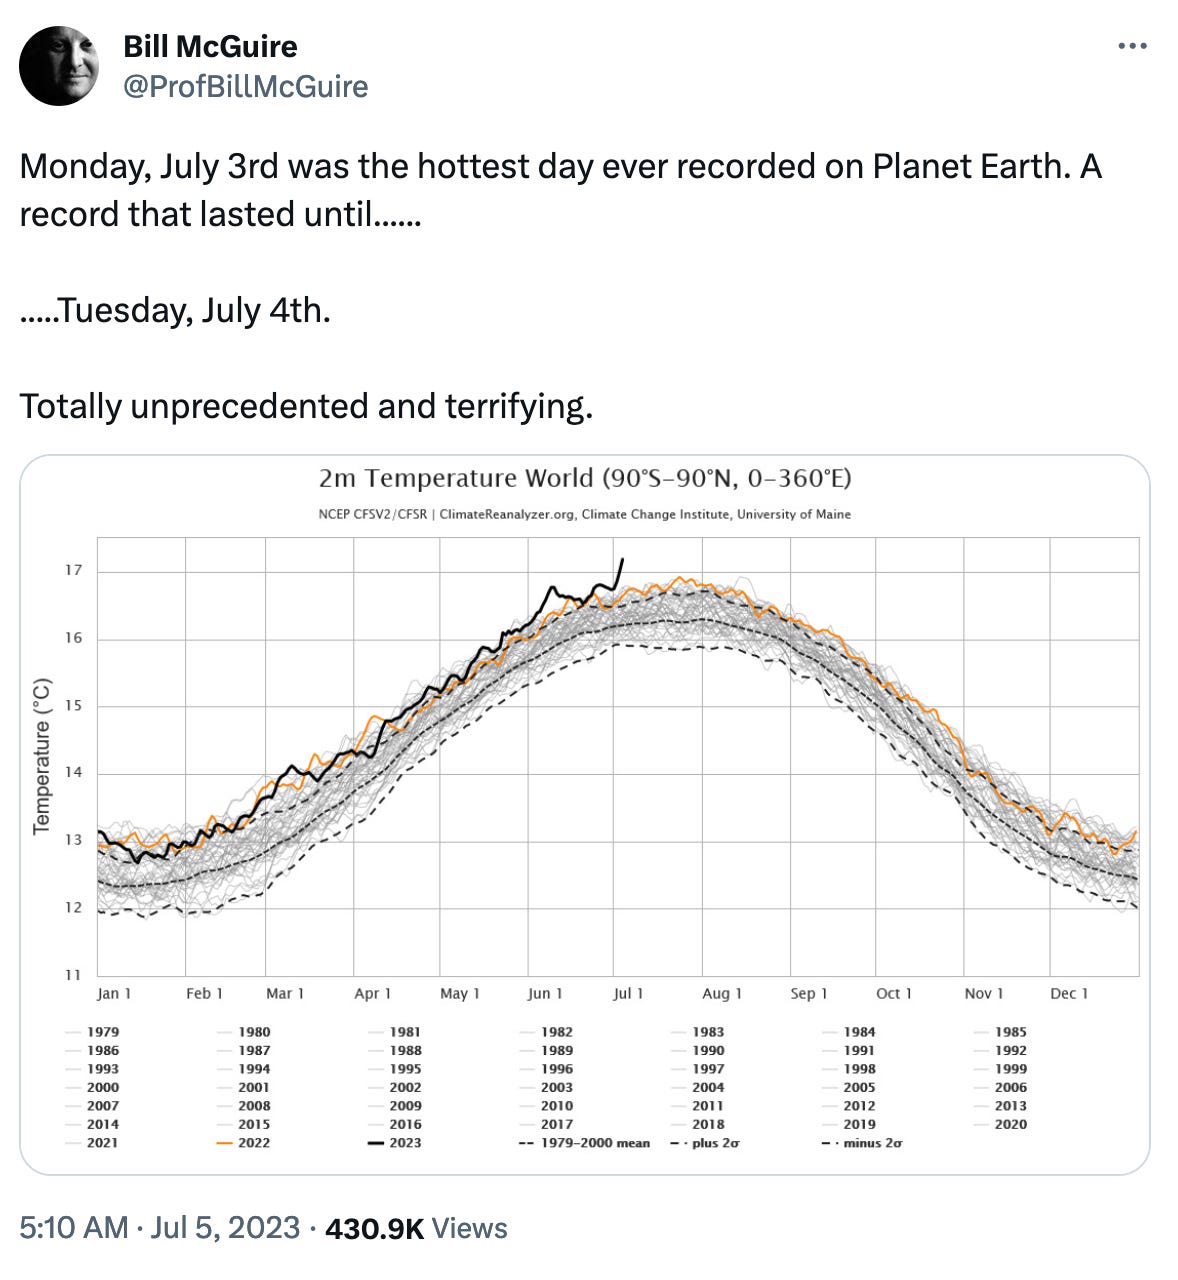 A tweet from Bill McGuire on July 5, 2023, that says, “Monday, July 3rd was the hottest day ever recorded on Planet Earth. A recored that lasted until Tuesday, July 4th. Totally unprecedented and terrifying.” There is a graph of a bell curve below the text, which shows the temperature around the world from 1979 to 2023. 2023 is the hottest year by far in June and July.